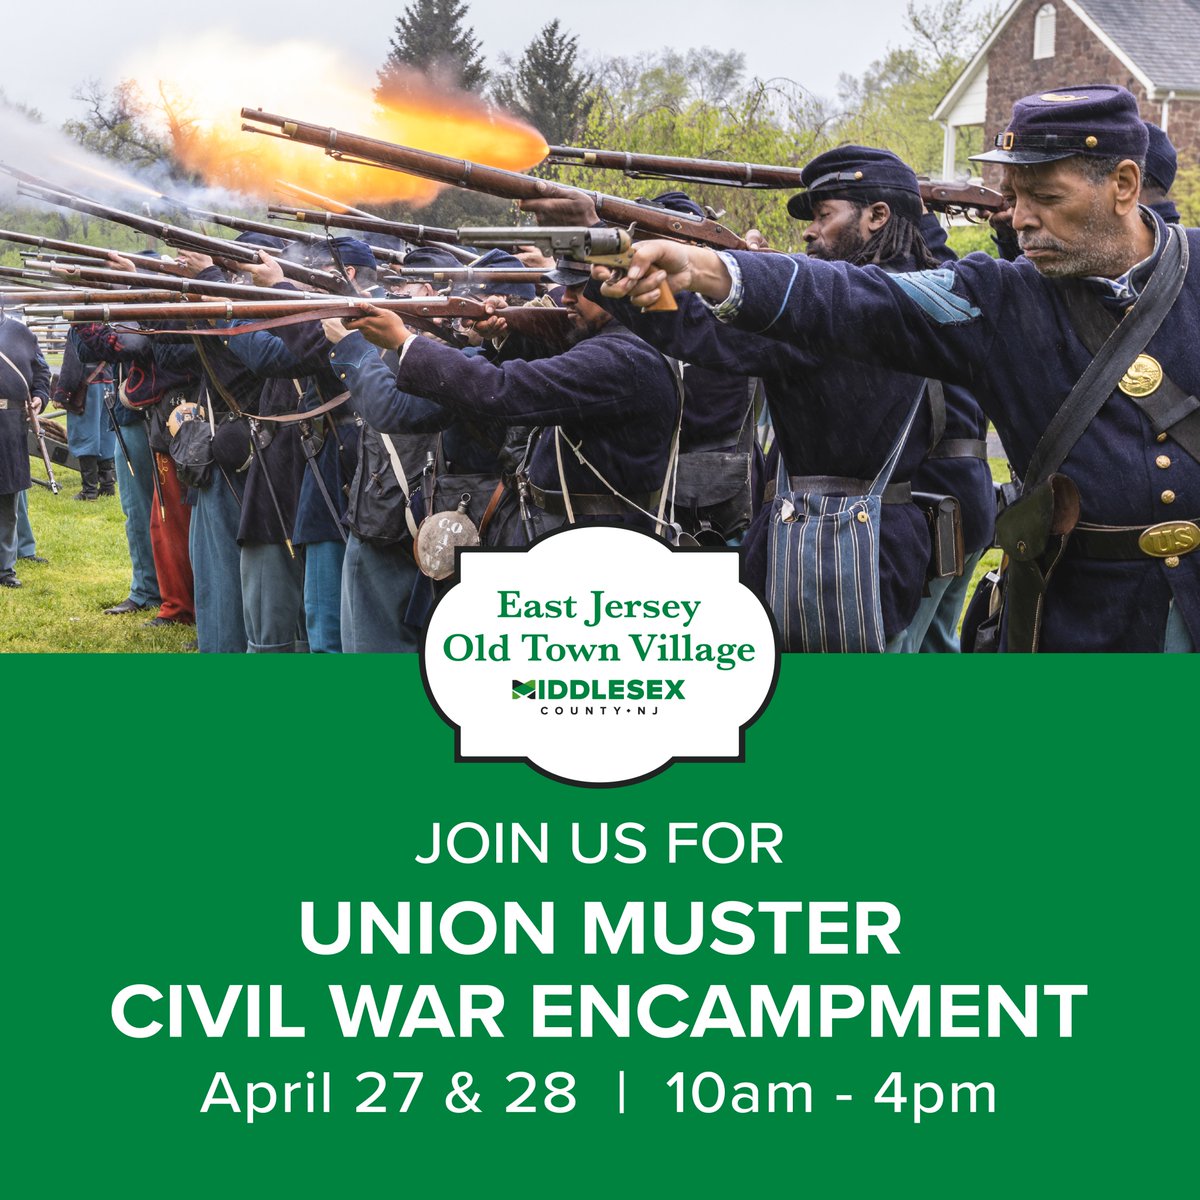 Travel back to the Civil War era at East Jersey Old Town Village's Union Muster event on April 27 & 28! Meet soldiers, civilians, and more as they bring history to life with reenactments and demonstrations. Fun for all ages! bit.ly/4axxqhF